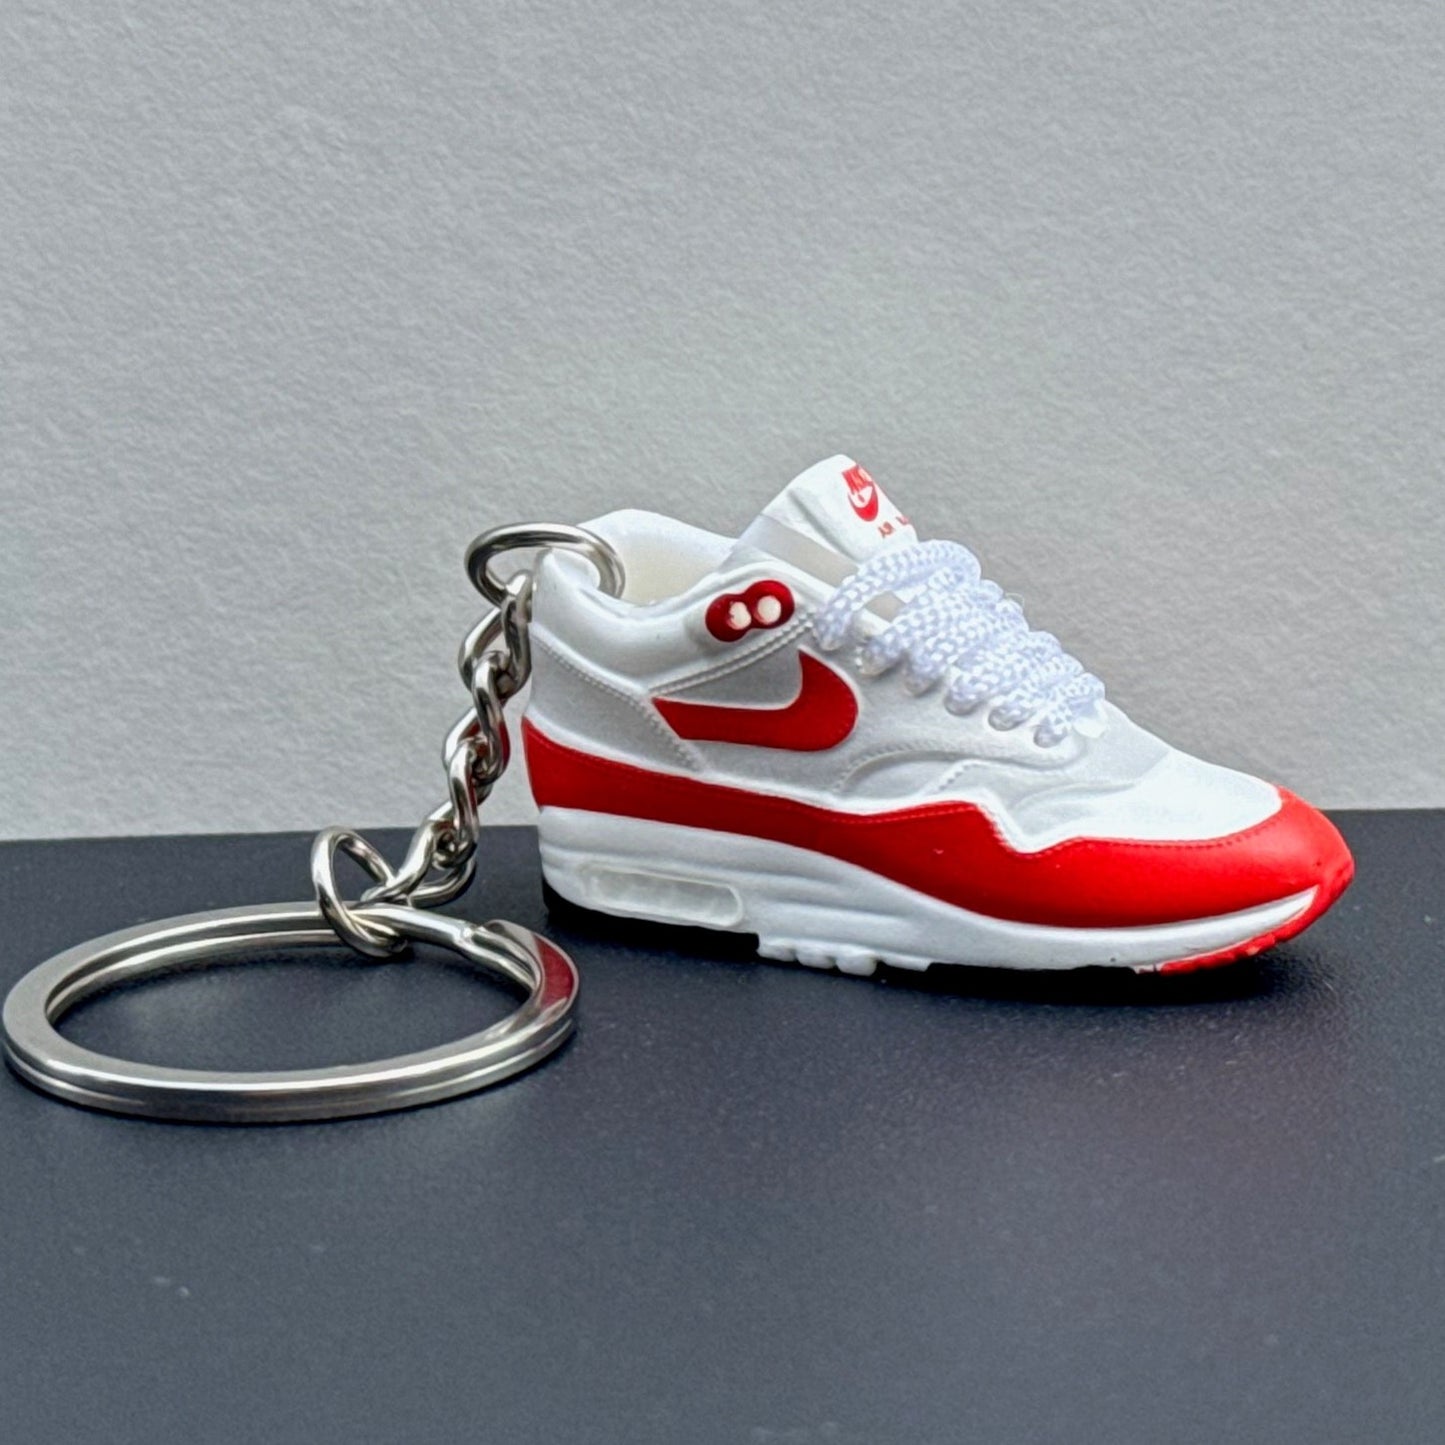 Air Max 1 3D Keyring - Red\White